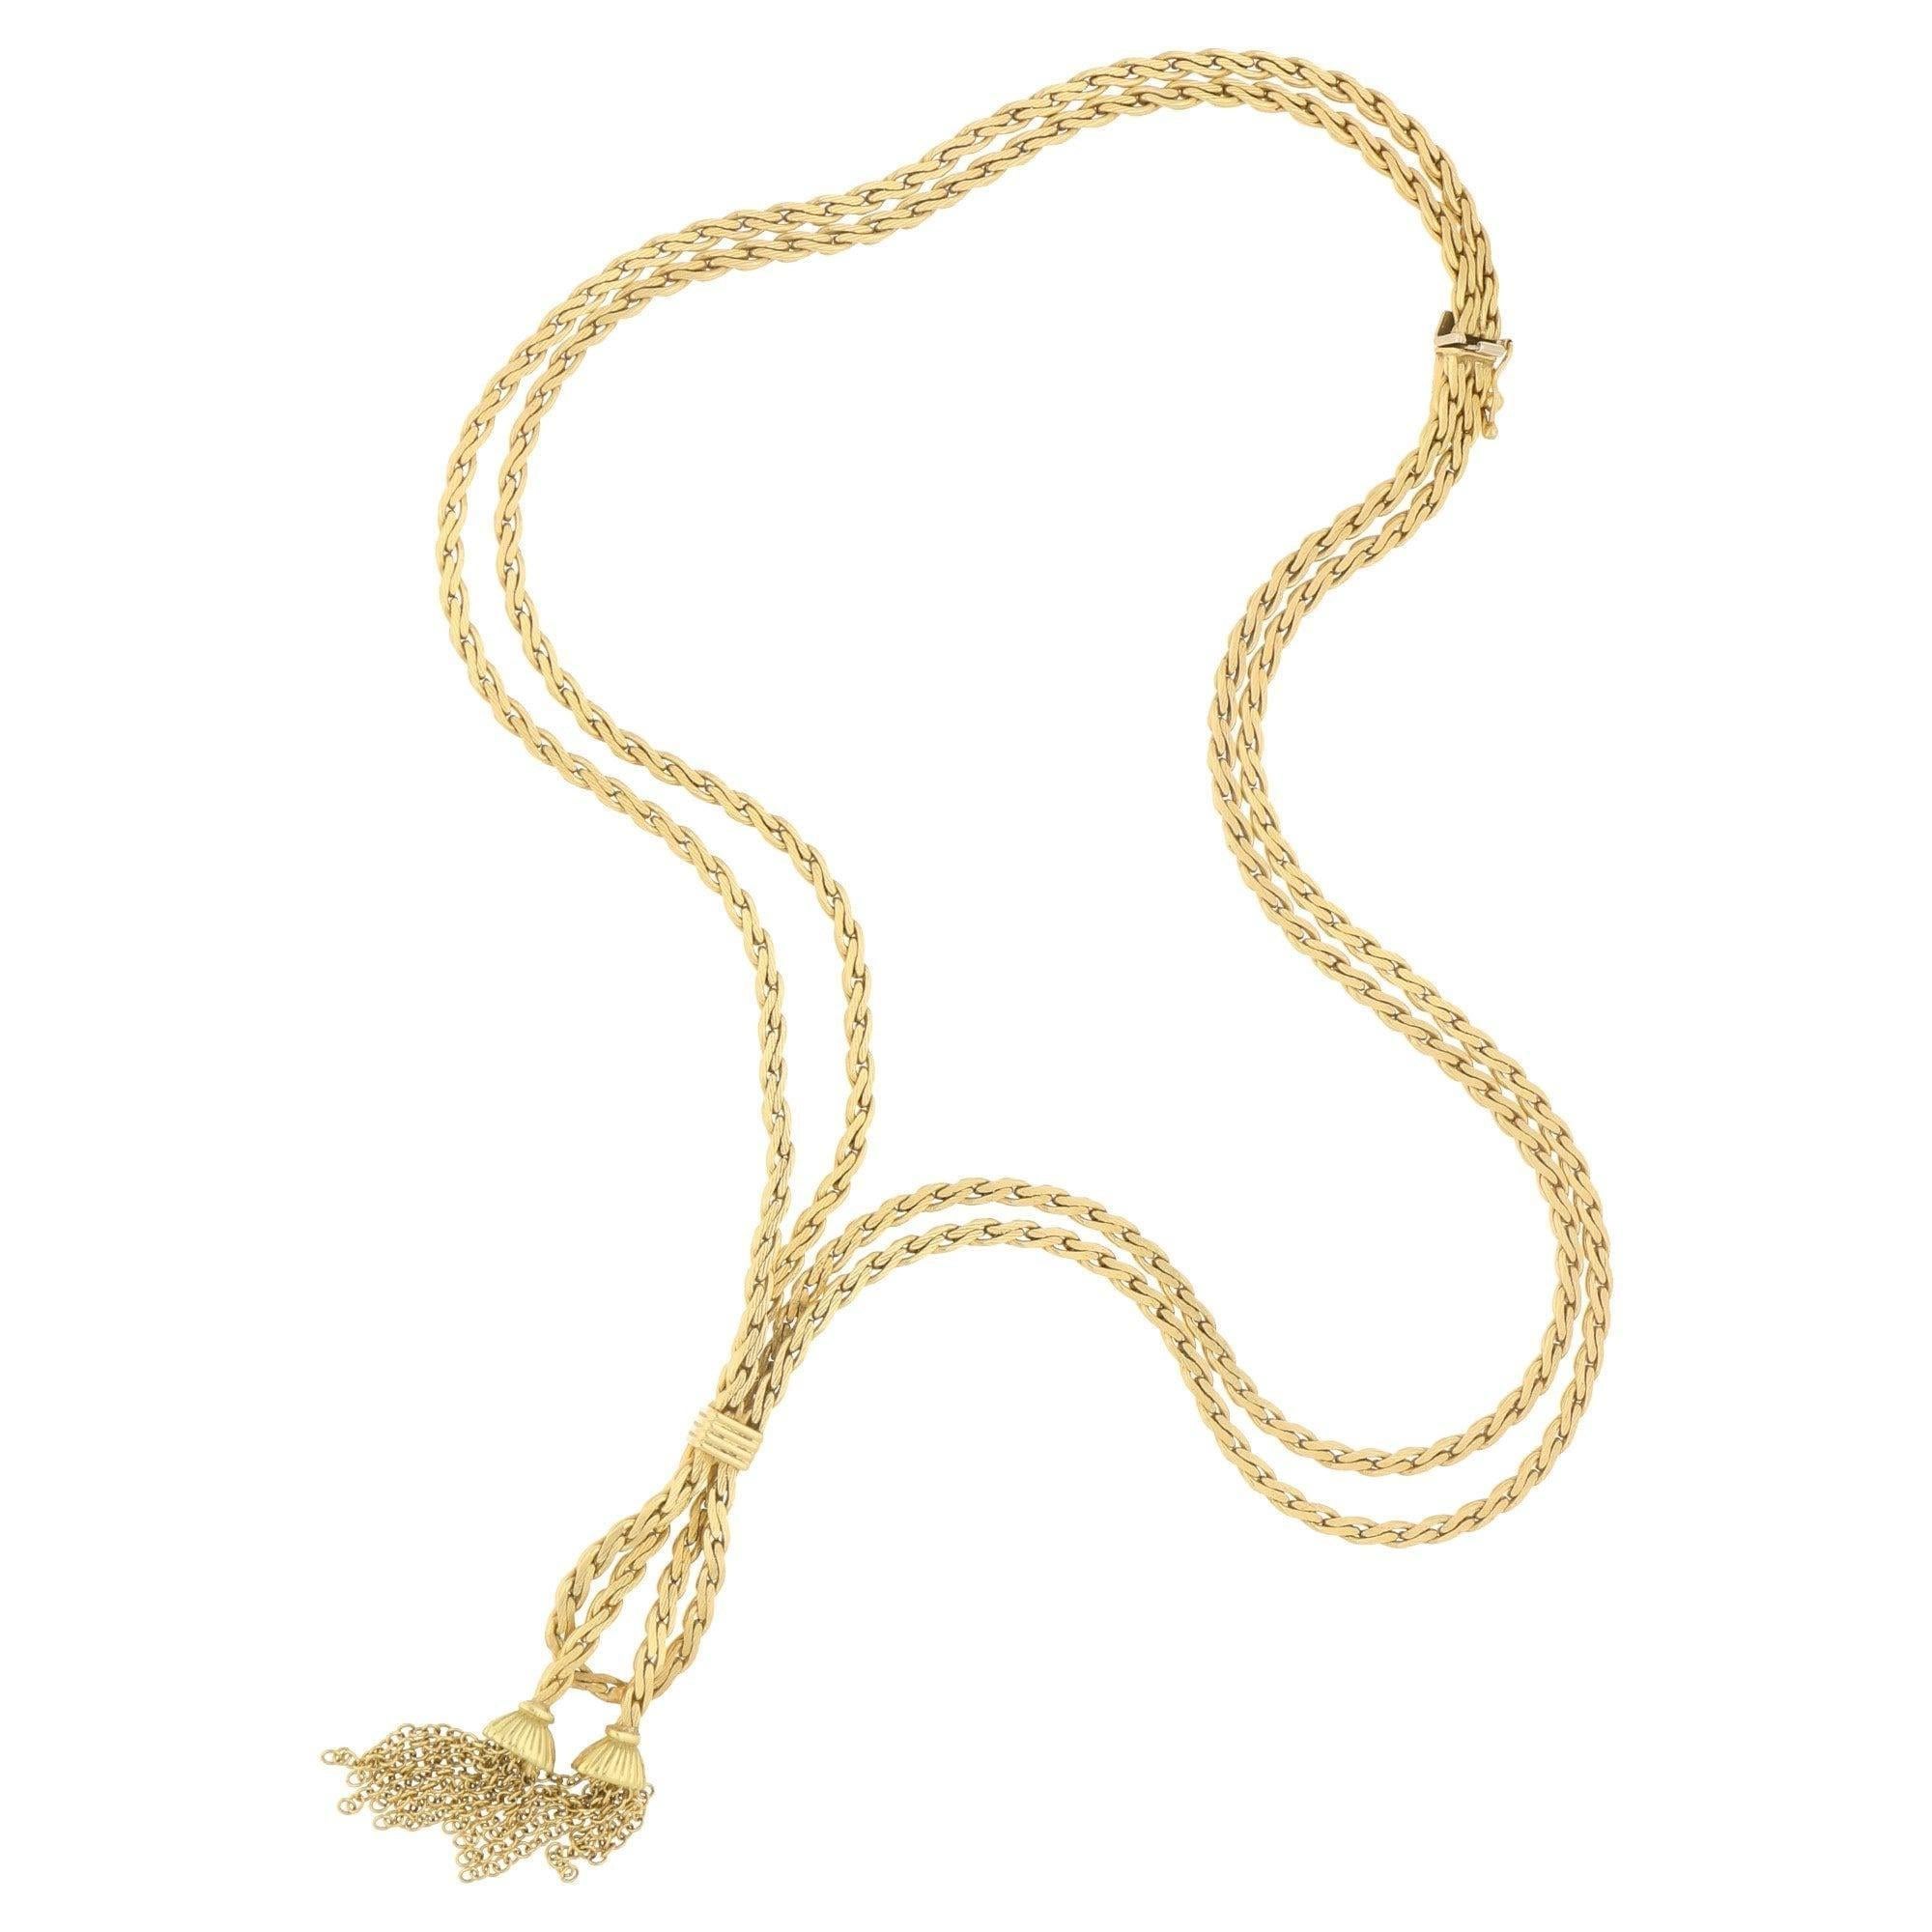 A lovely vintage tassel necklace set in 18k yellow gold.

This necklace has been beautifully hand crafted and features two strands of solid 18k yellow gold chain. Both chains hang elegantly and meet in the center of the neck where they are secured